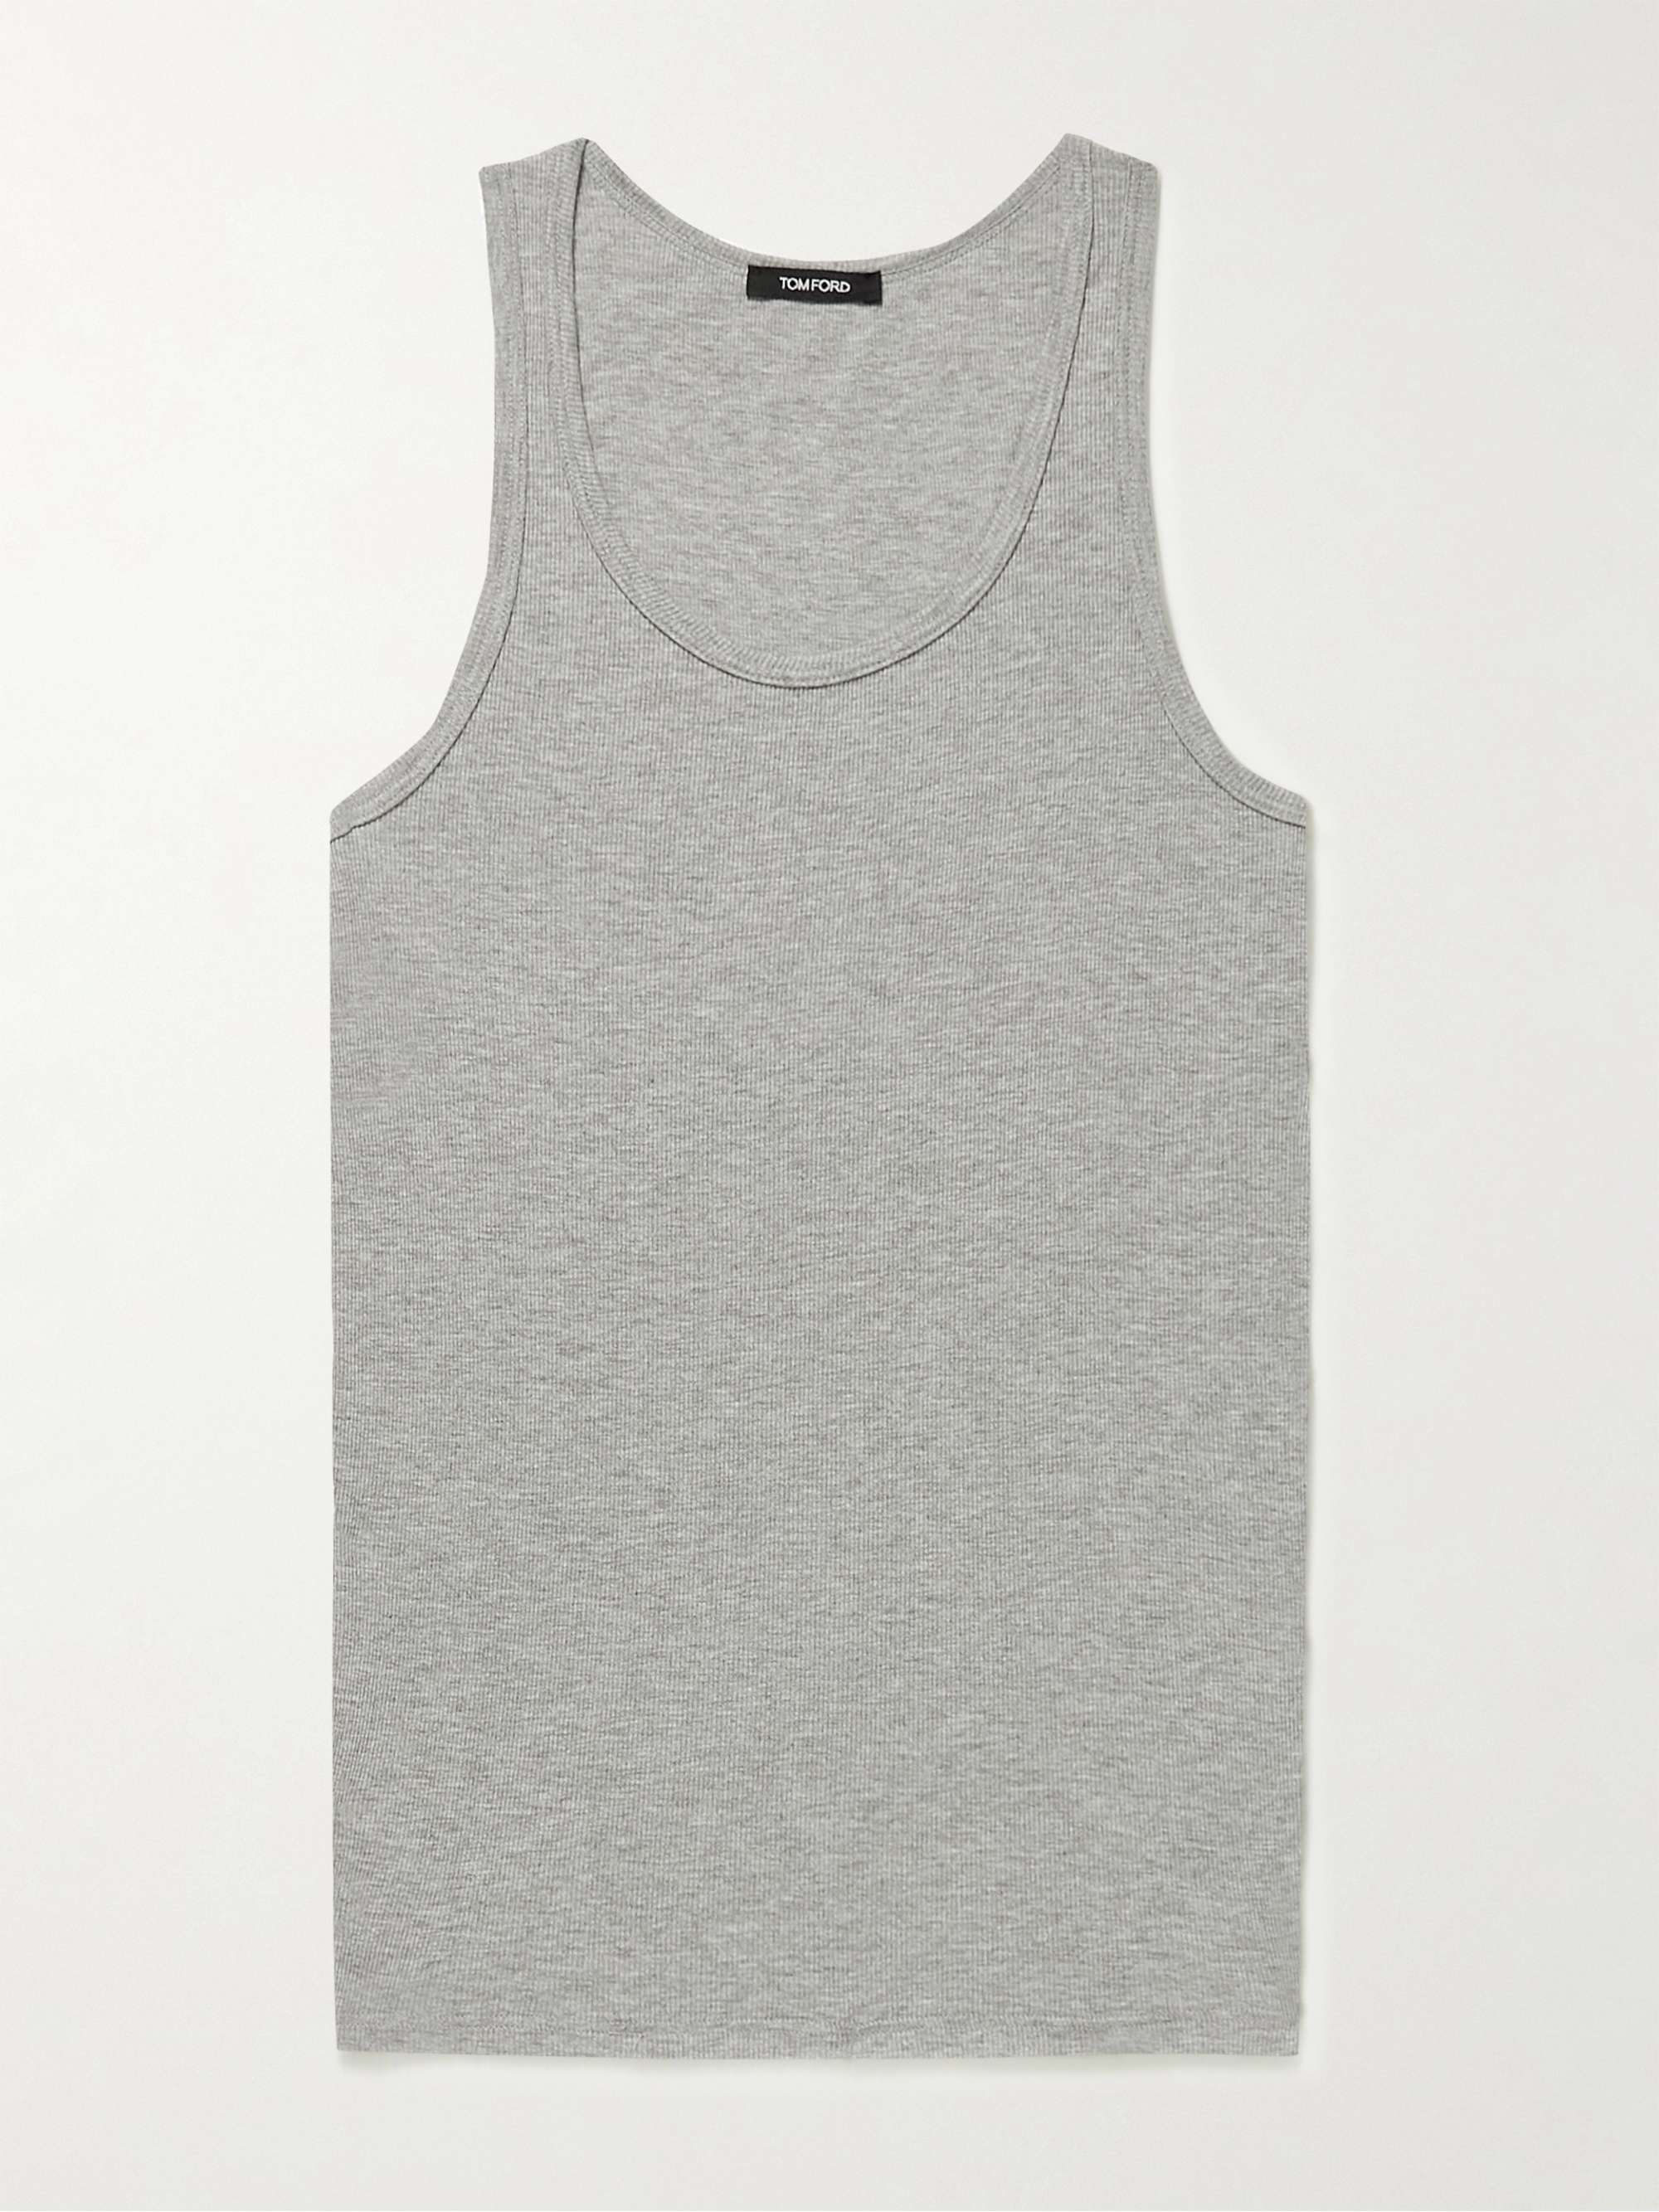 TOM FORD Ribbed Cotton and Modal-Blend Tank Top for Men | MR PORTER